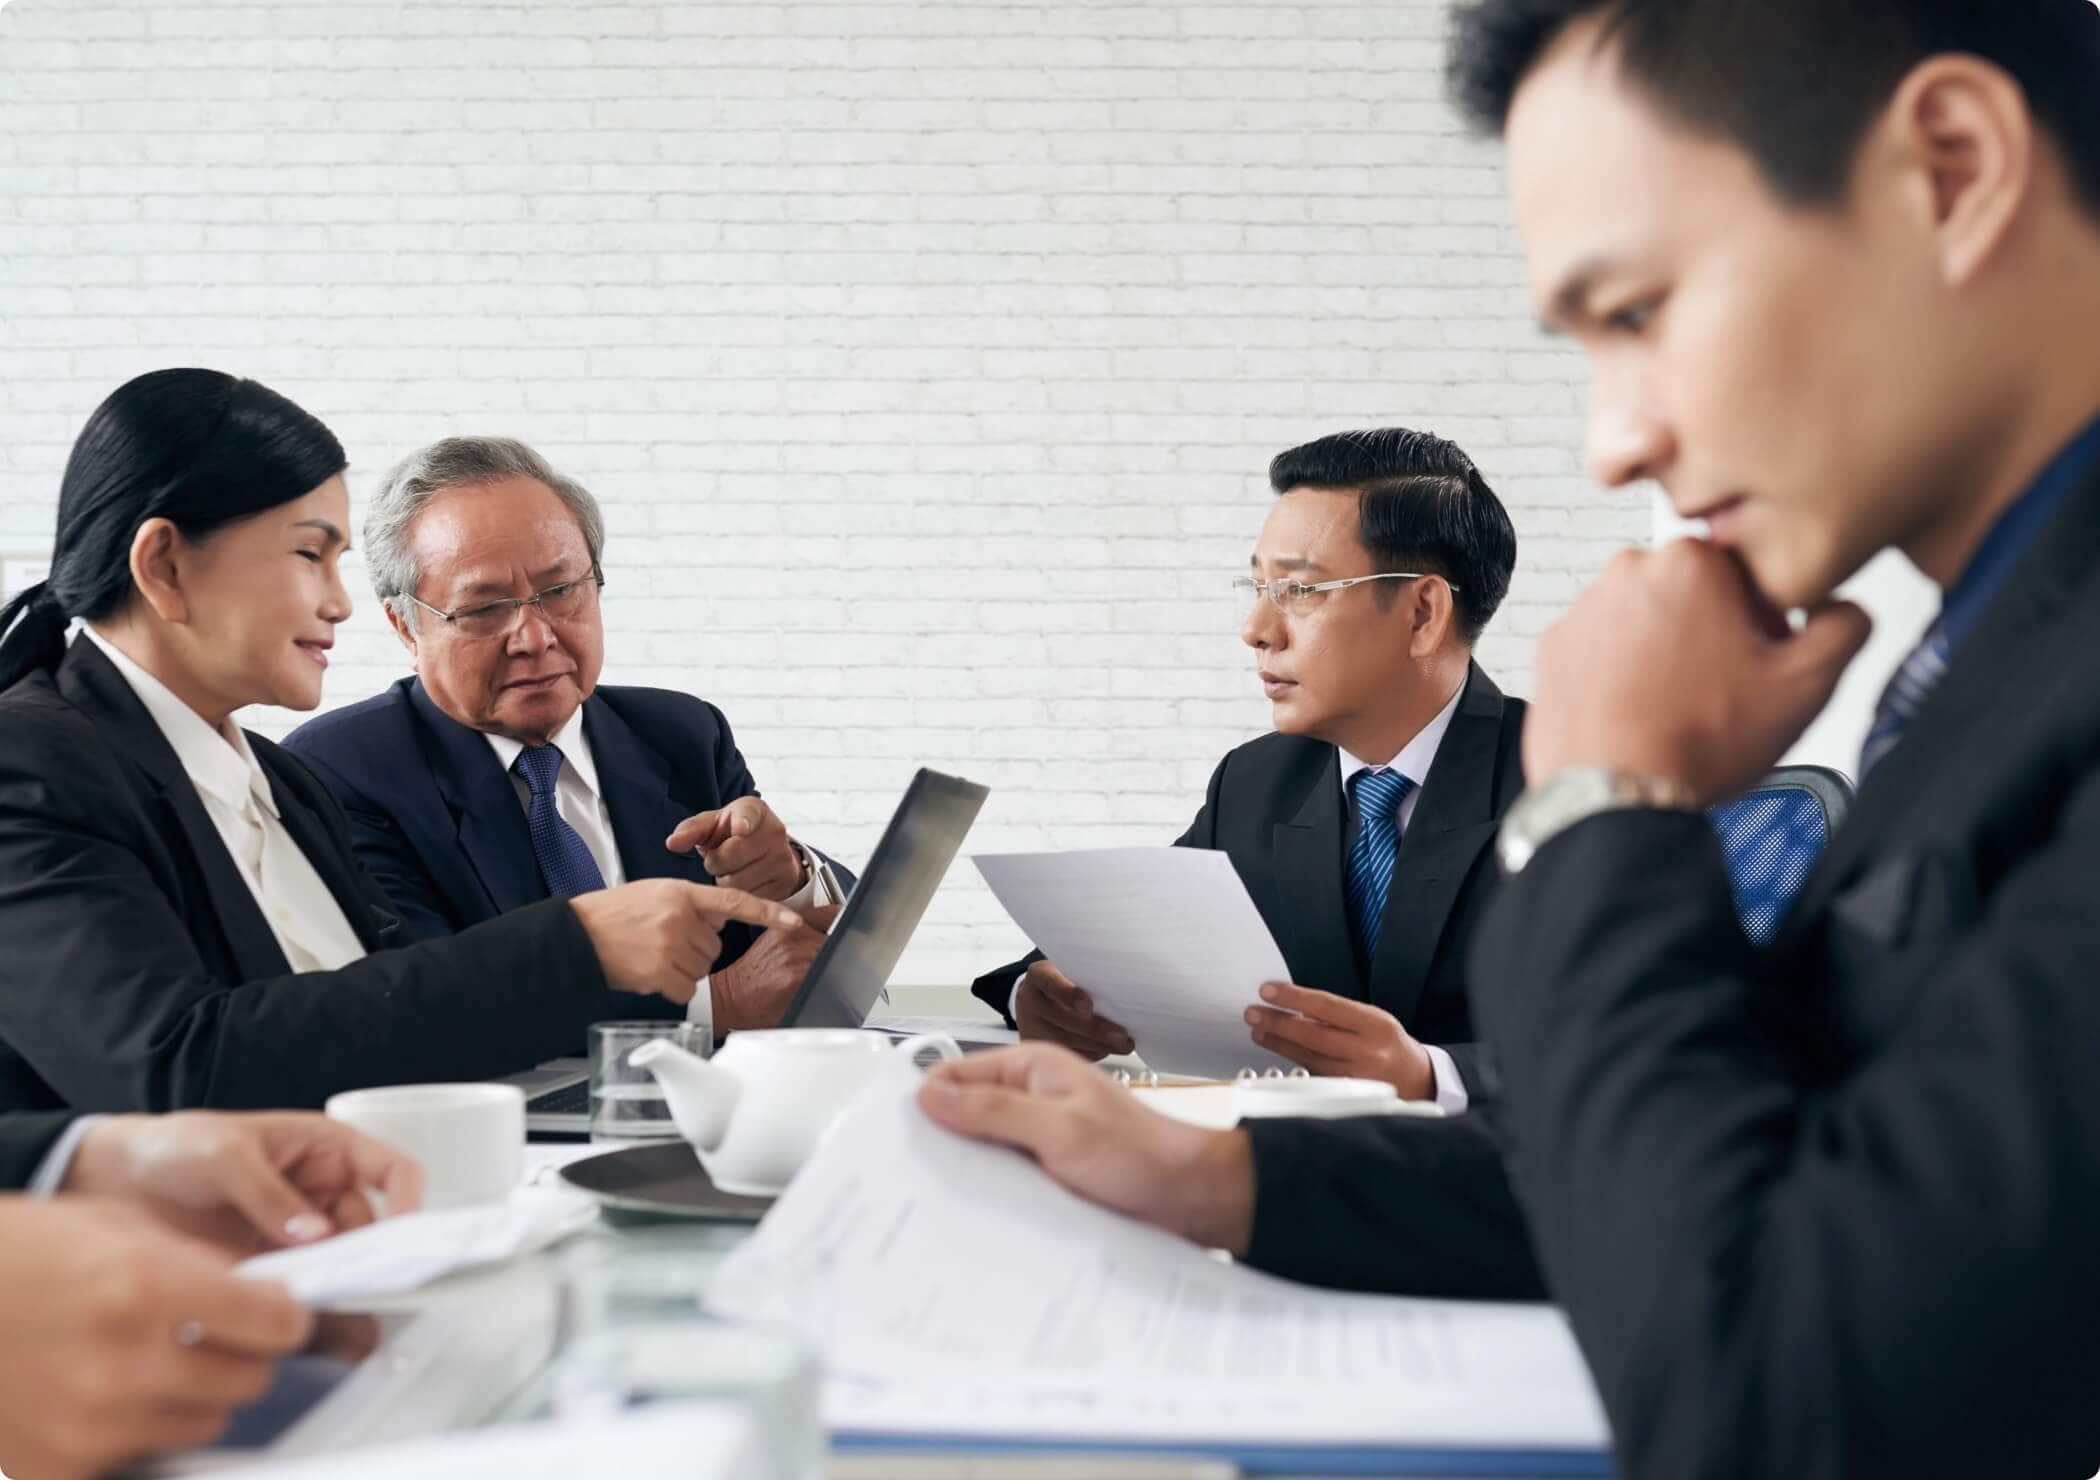 man looking intently and documents while having meeting